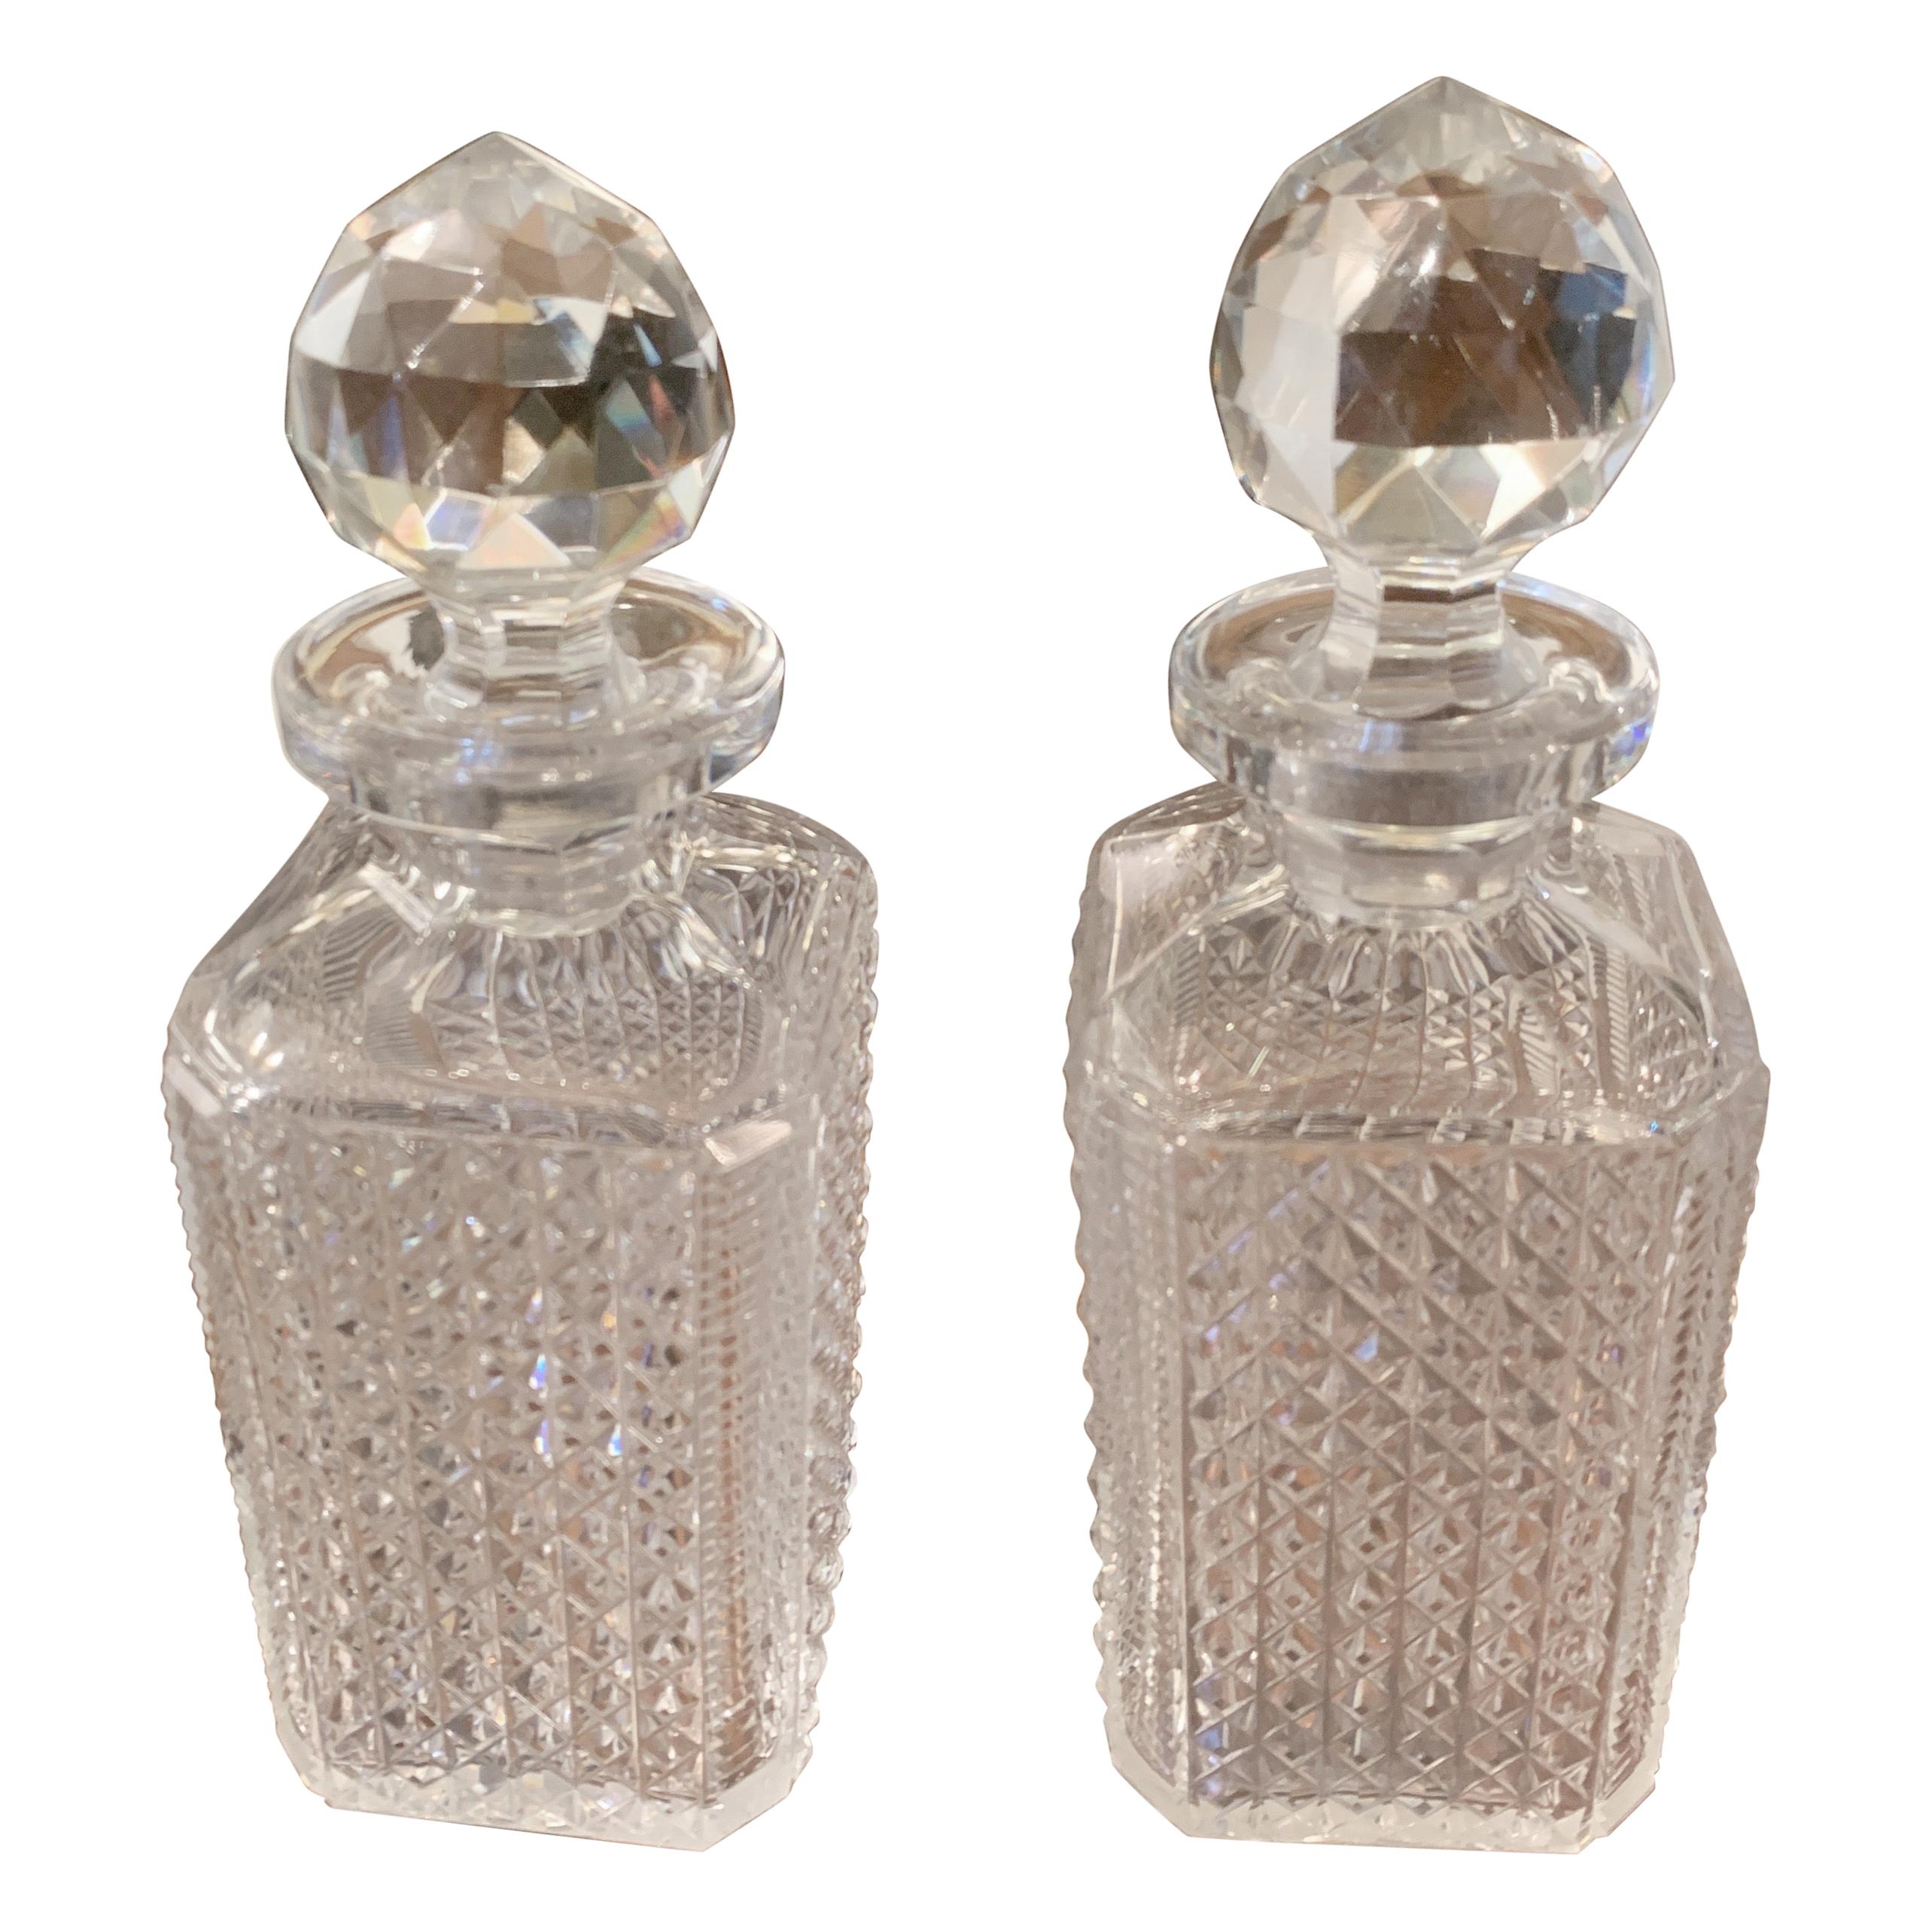 Pair of French Baccarat Cut Crystal Decanters, Early 20th Century